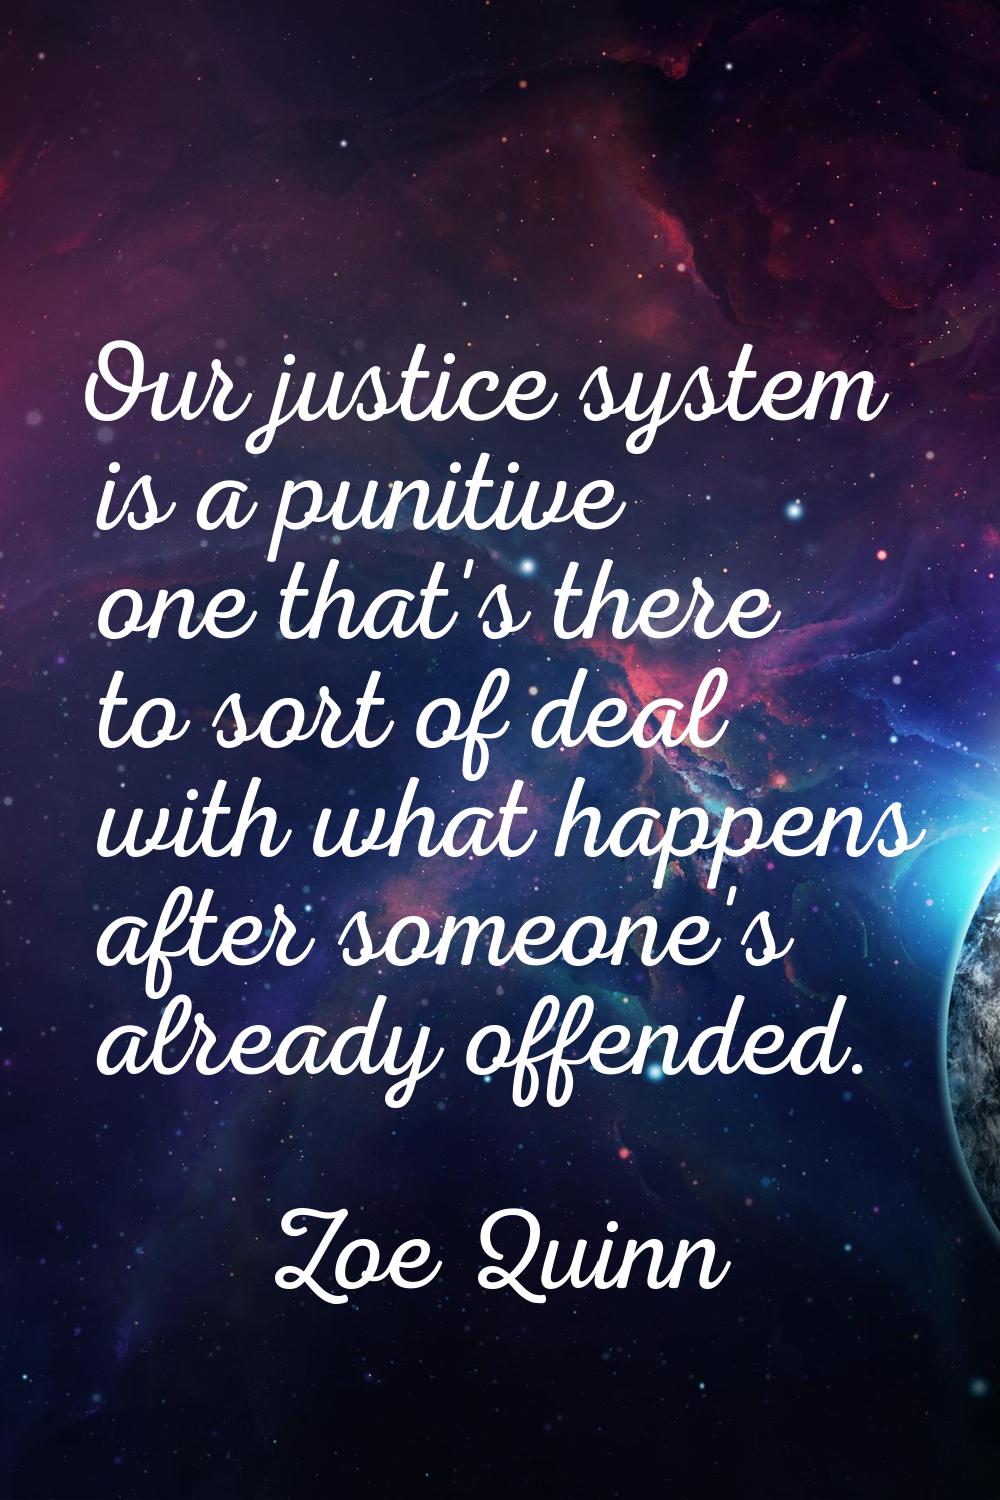 Our justice system is a punitive one that's there to sort of deal with what happens after someone's